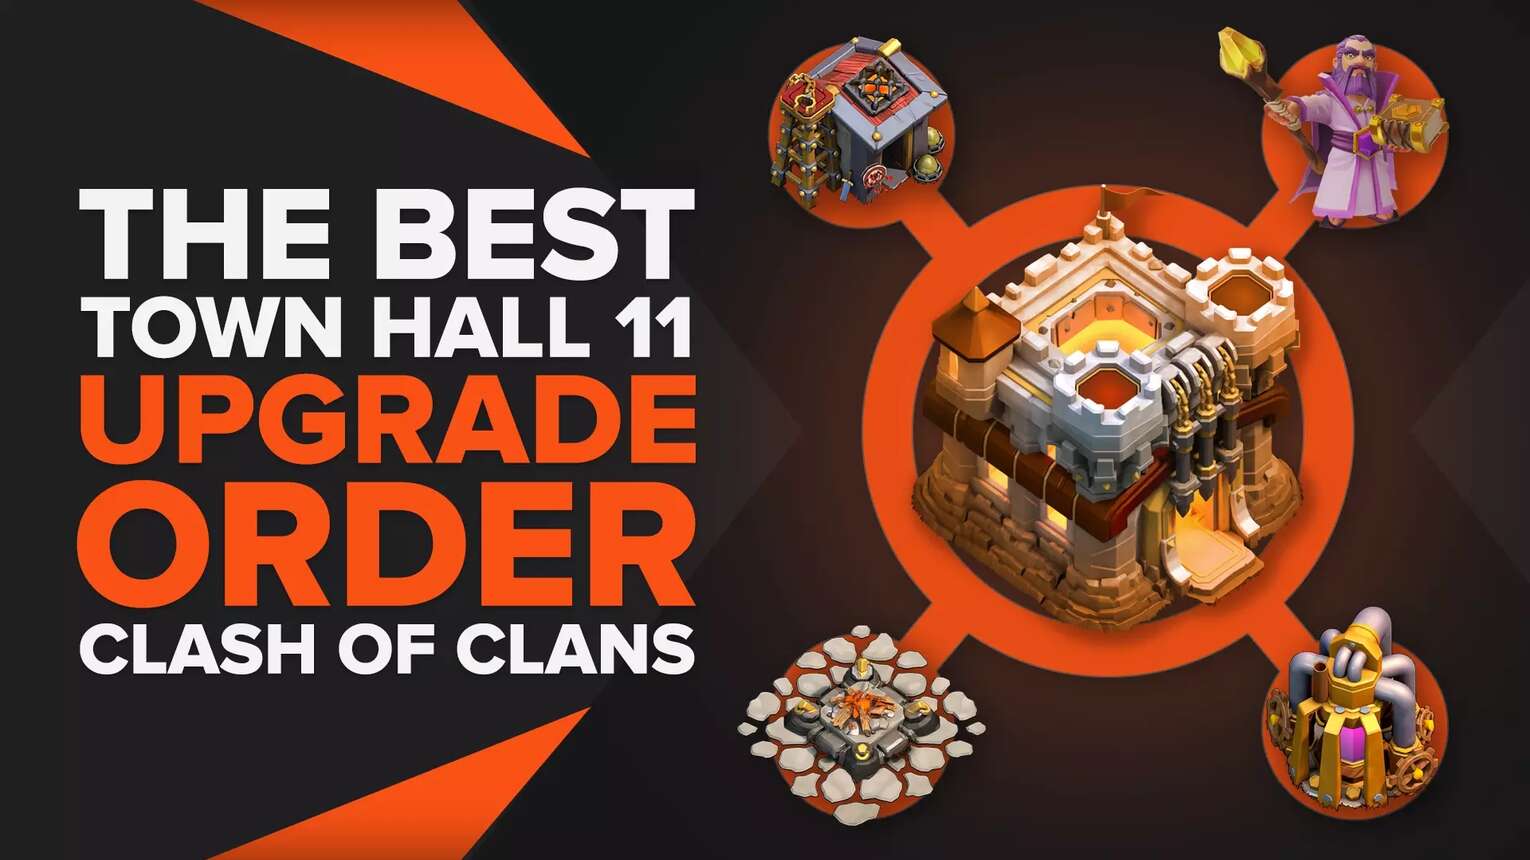 See The Best Town Hall 11 Upgrade Order In Clash Of Clans!